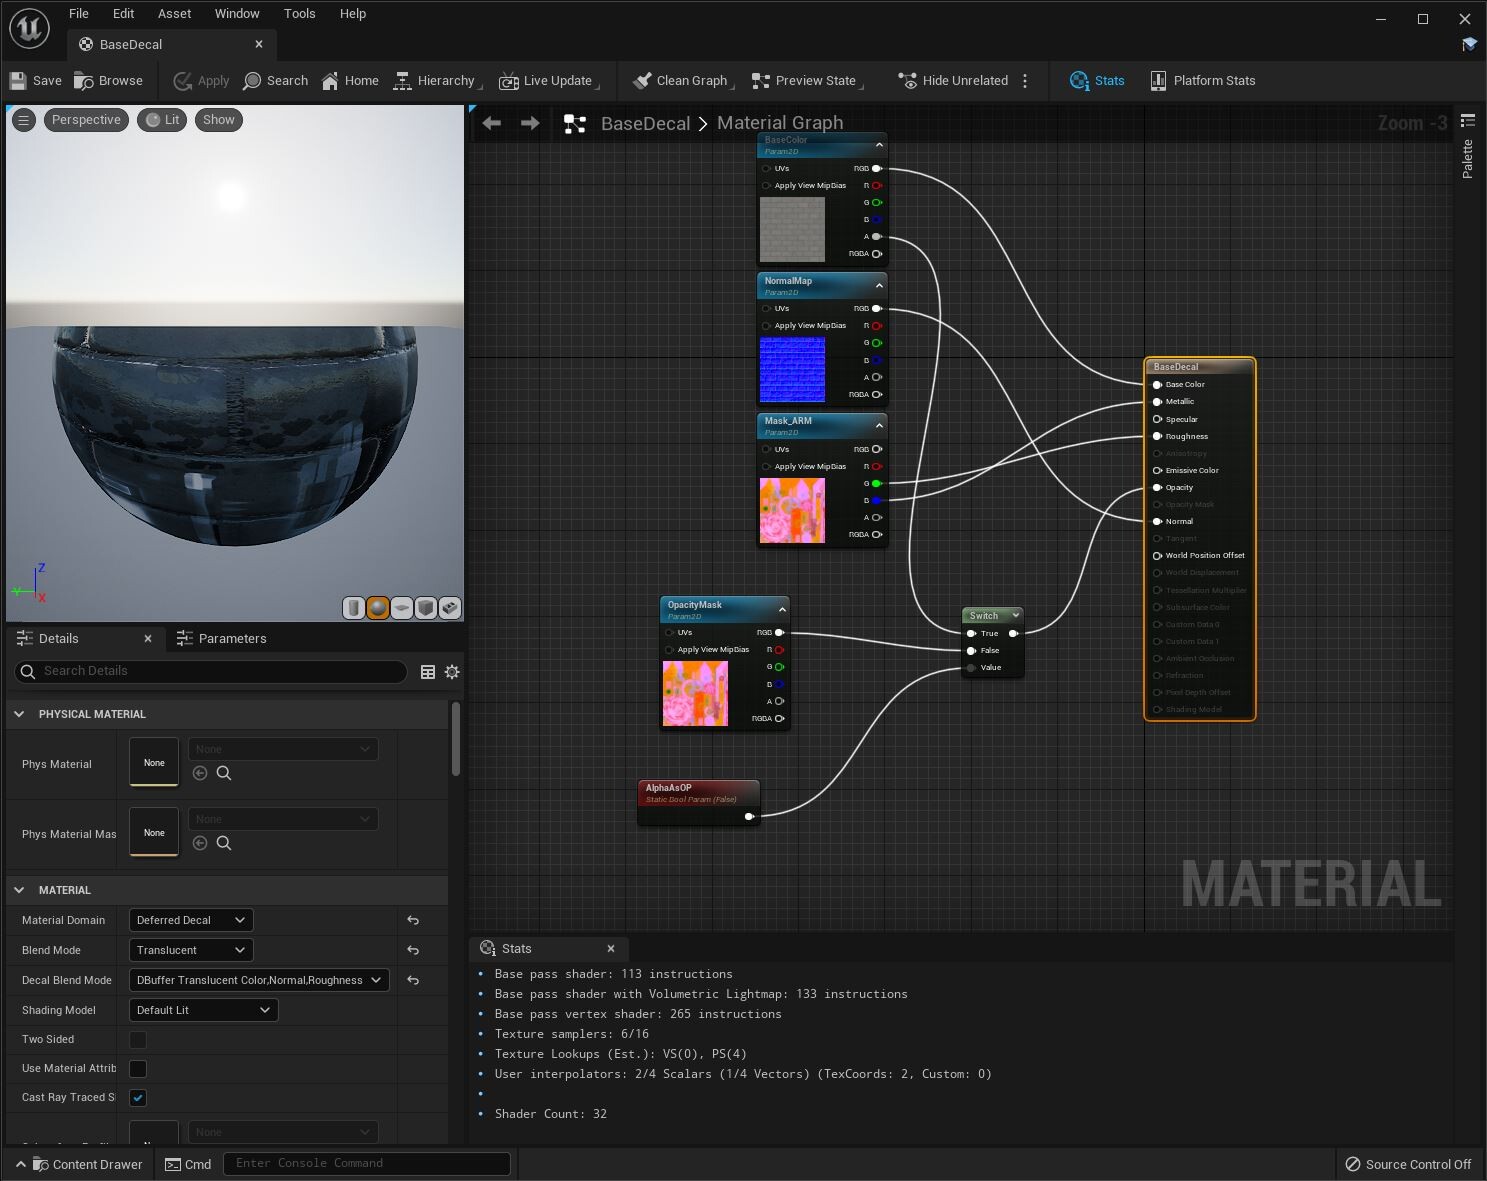 Material Blend Modes in Unreal Engine